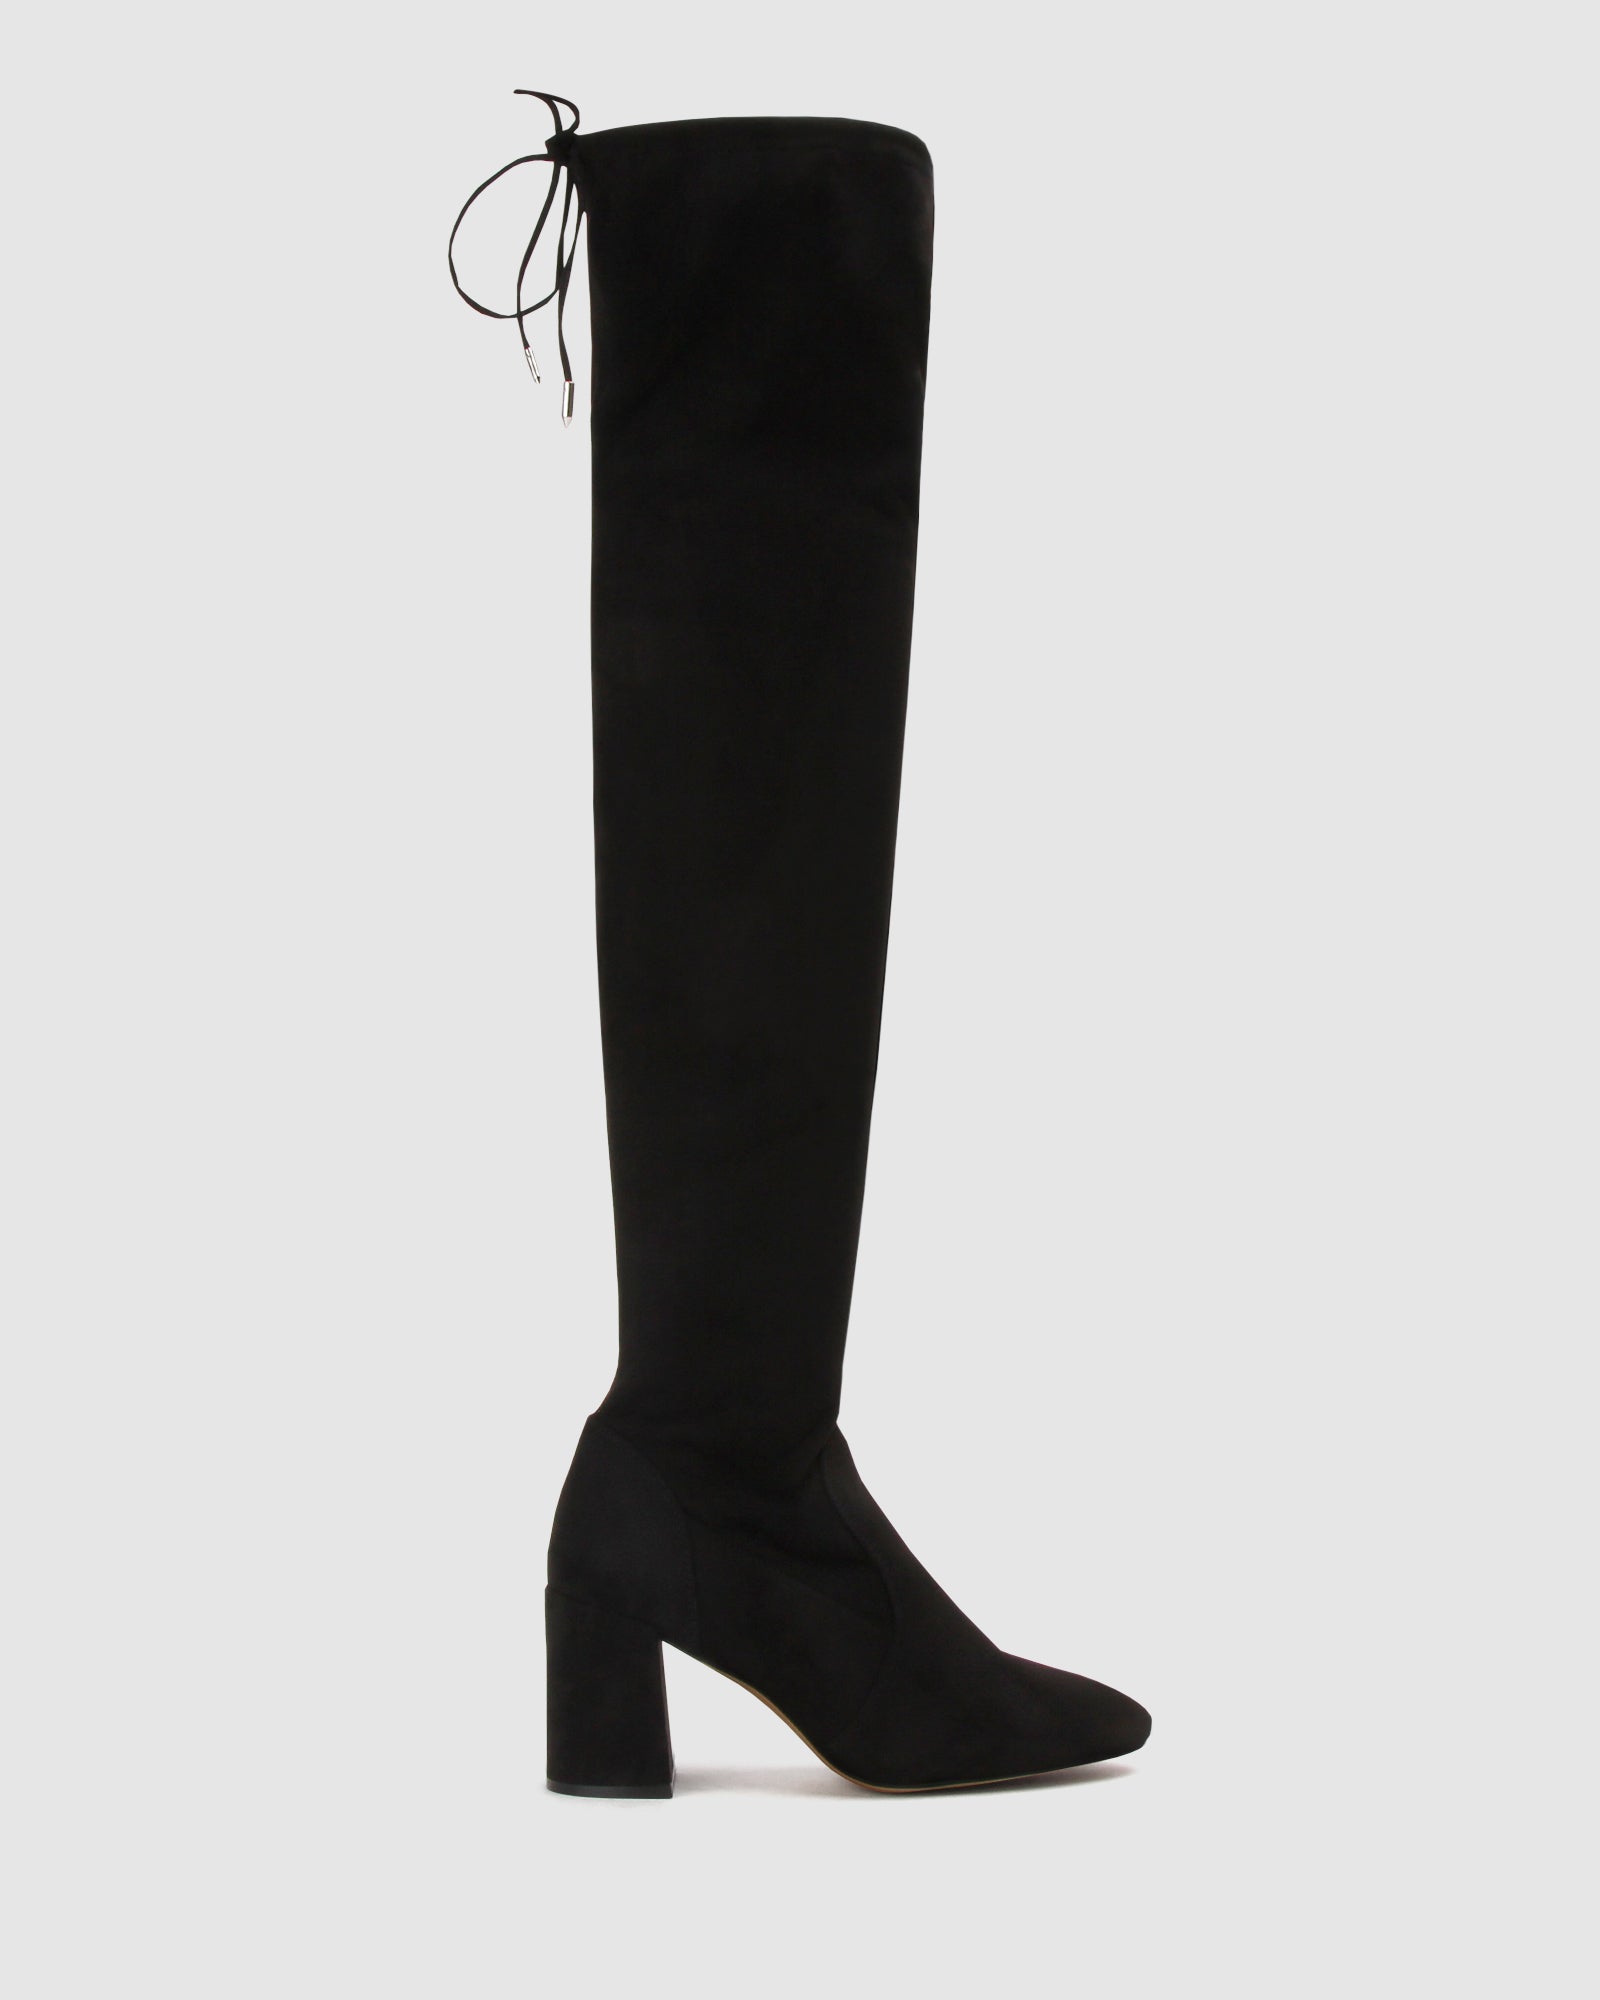 Buy GOLDEN Over The Knee Boots by Betts online - Betts